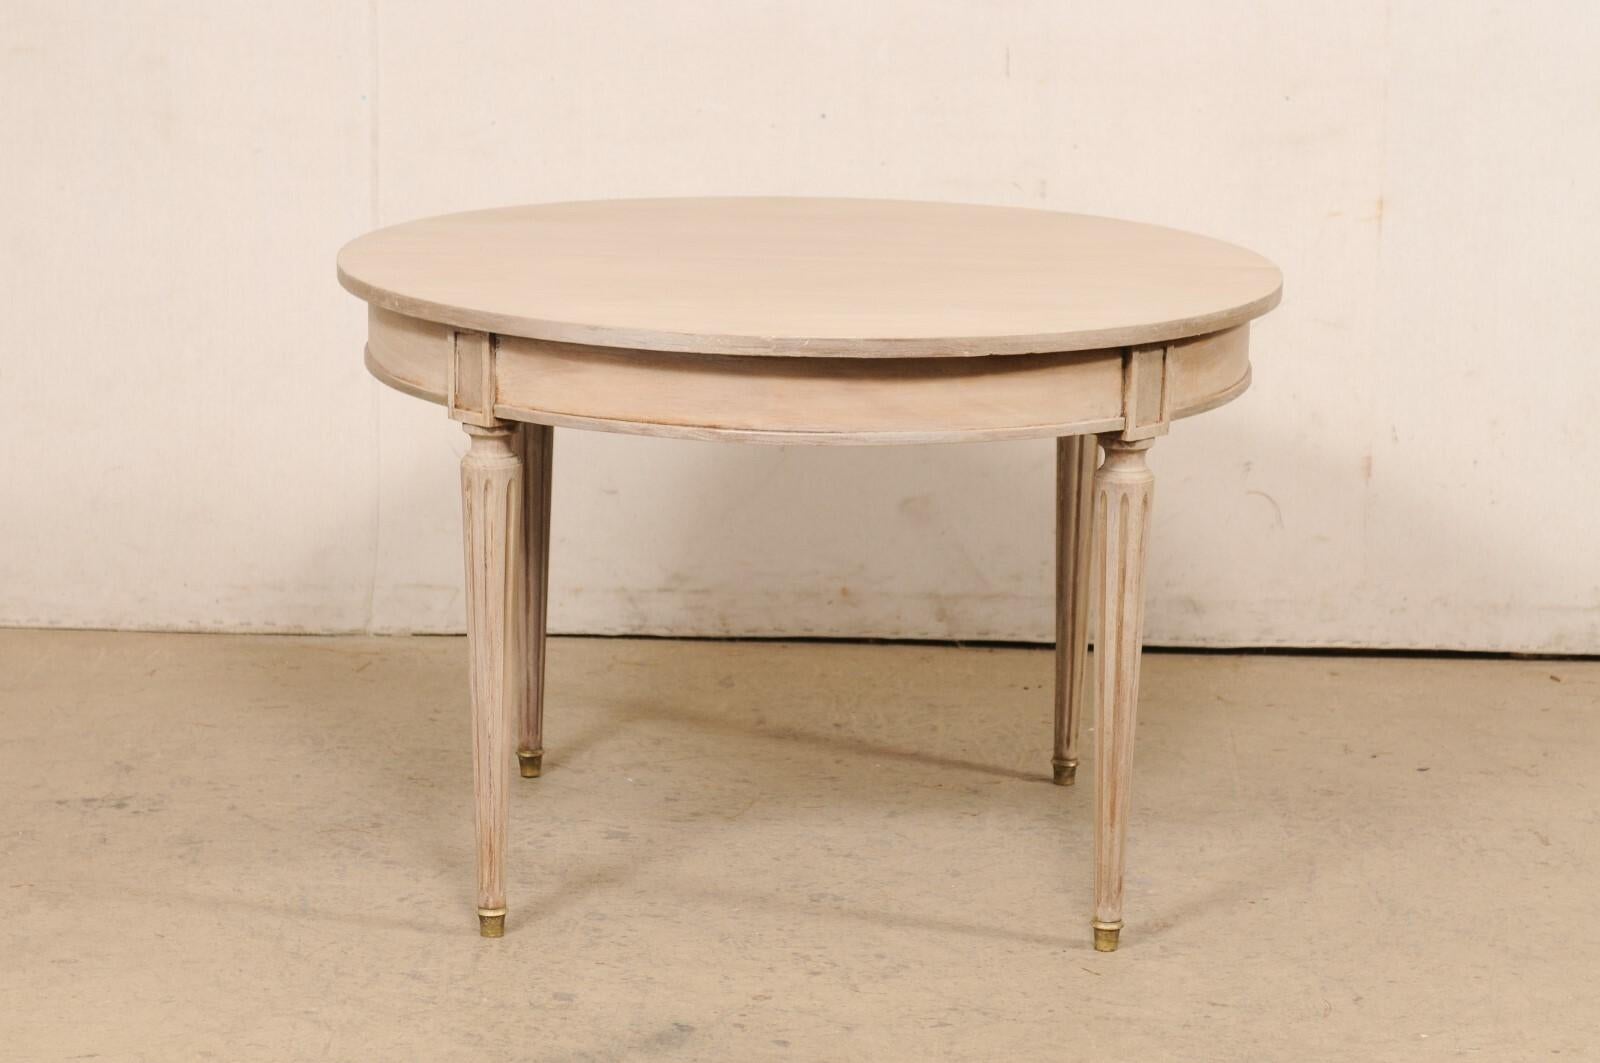 French Round Painted Wood Table w/Fluted Legs & Brass Feet, 3.5 Ft Diameter For Sale 3